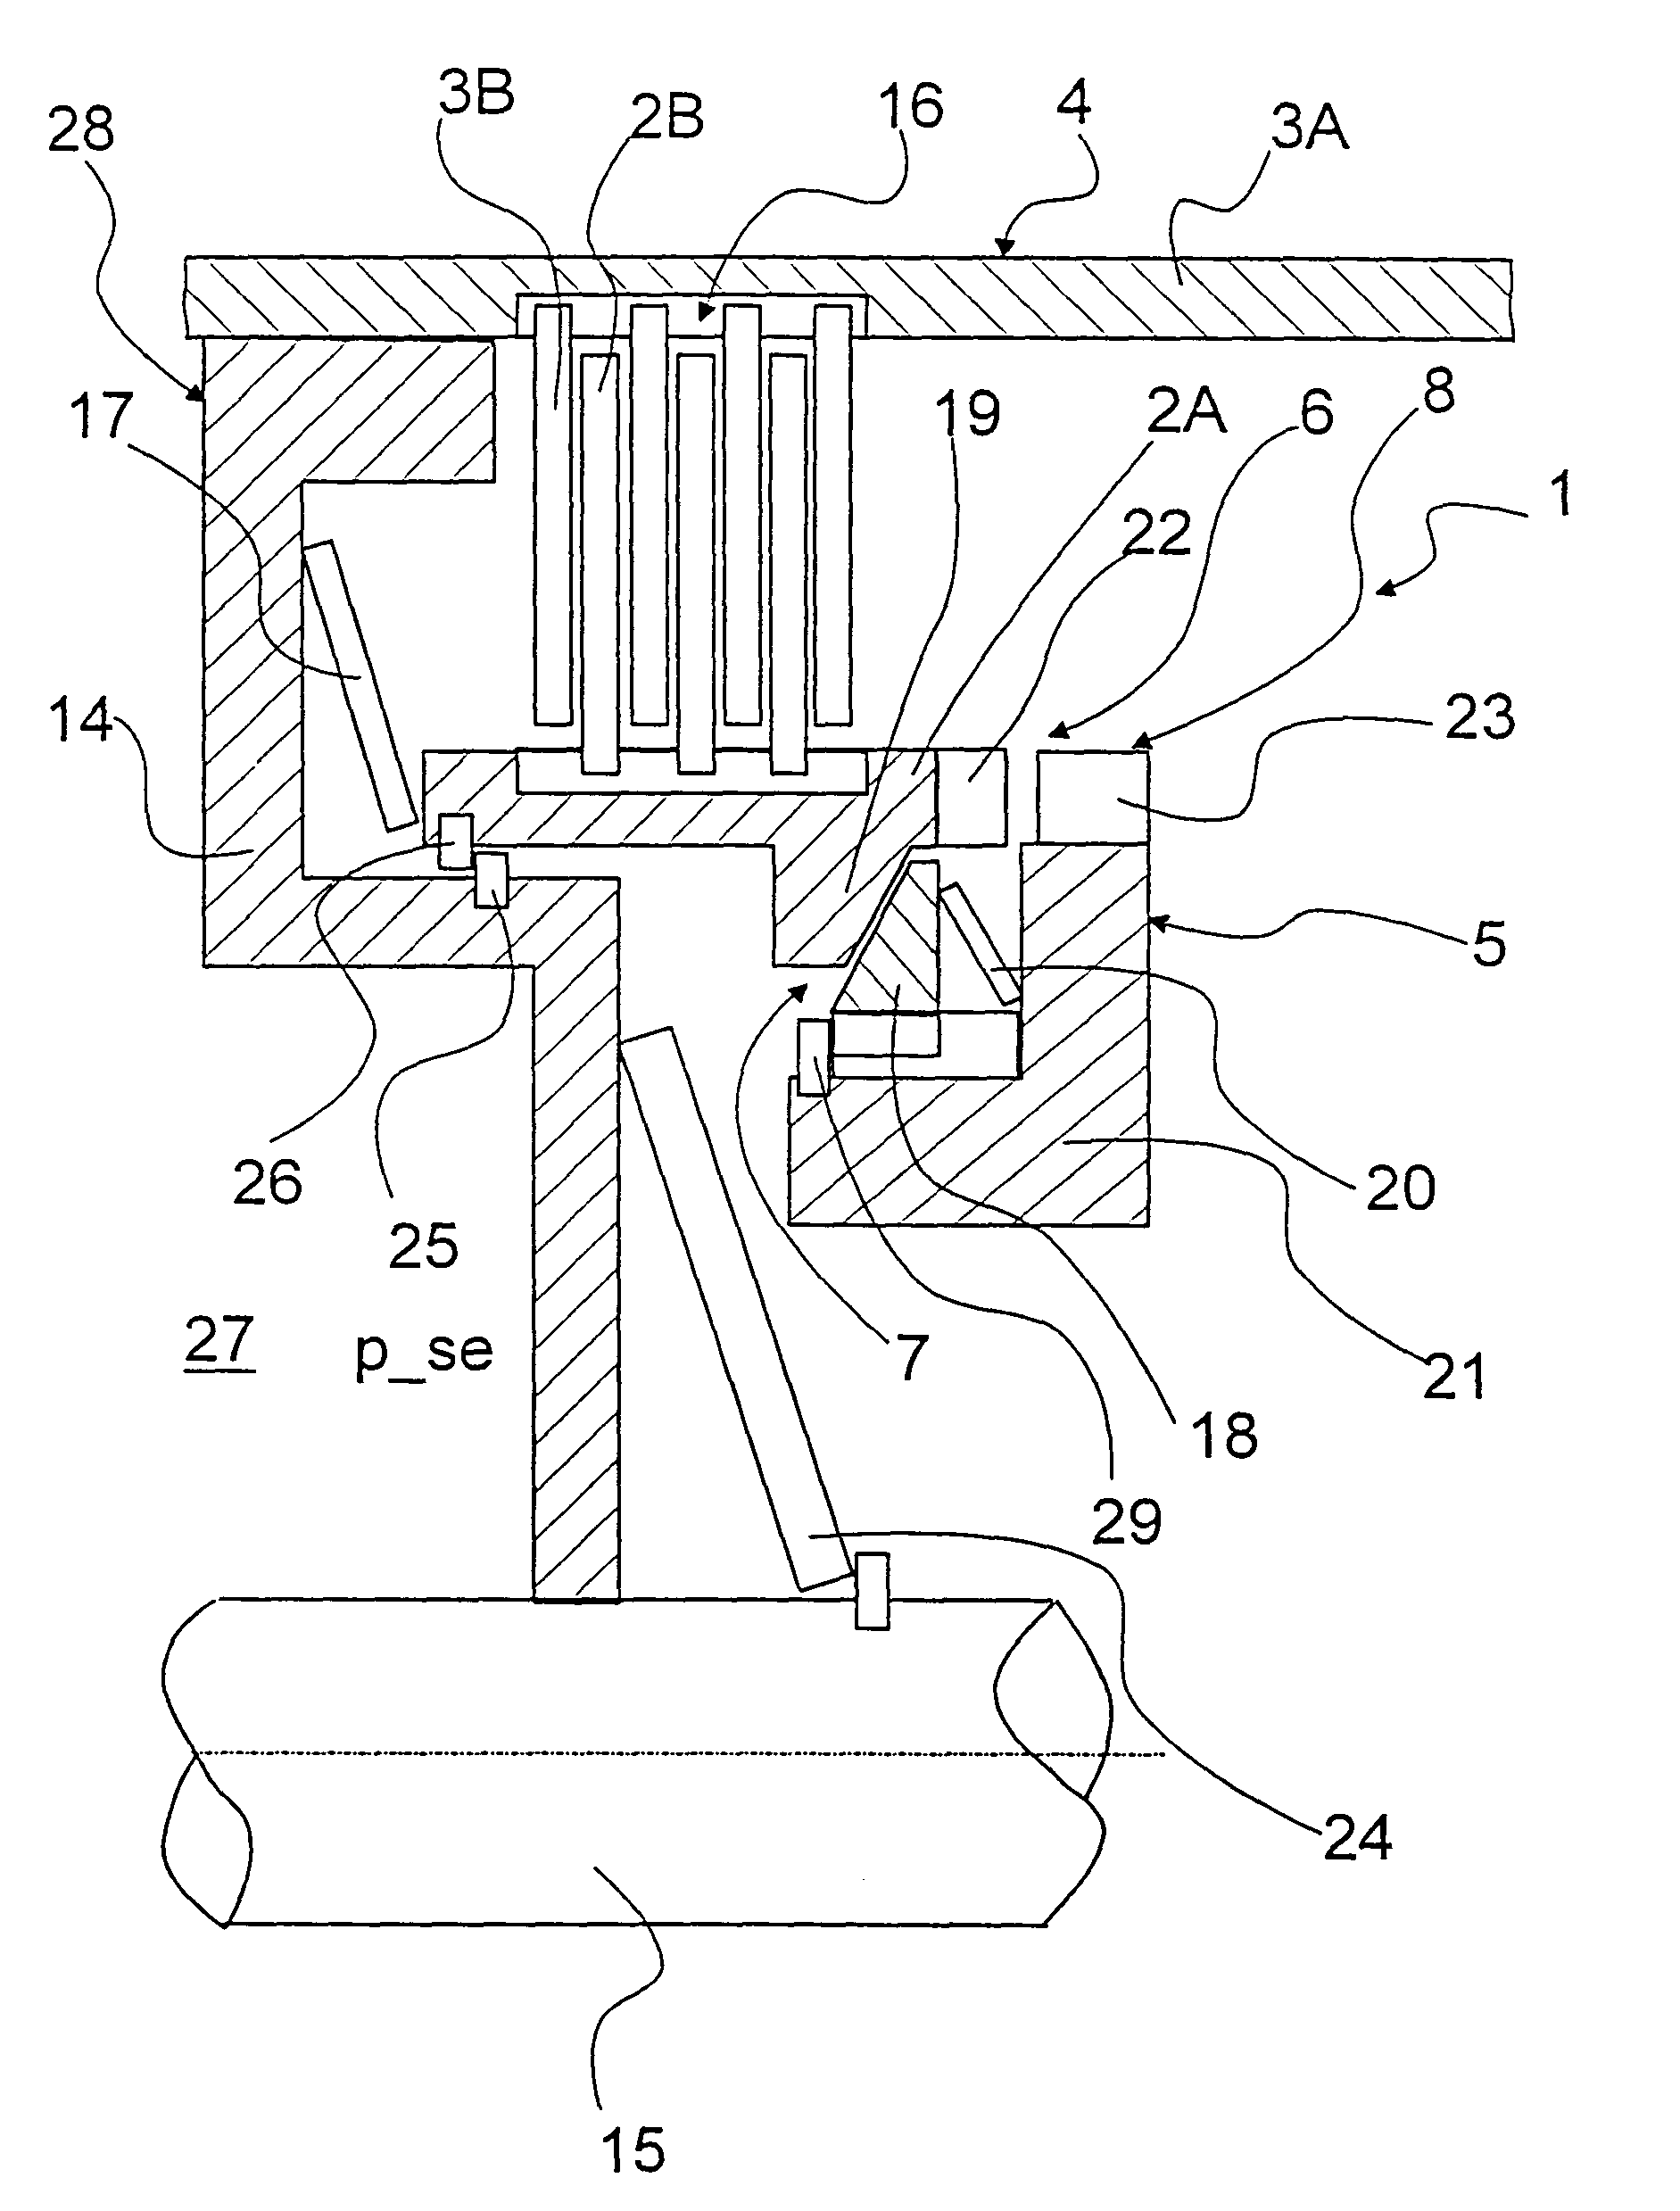 Transmission and method for controlling a transmission with at least one shift control element